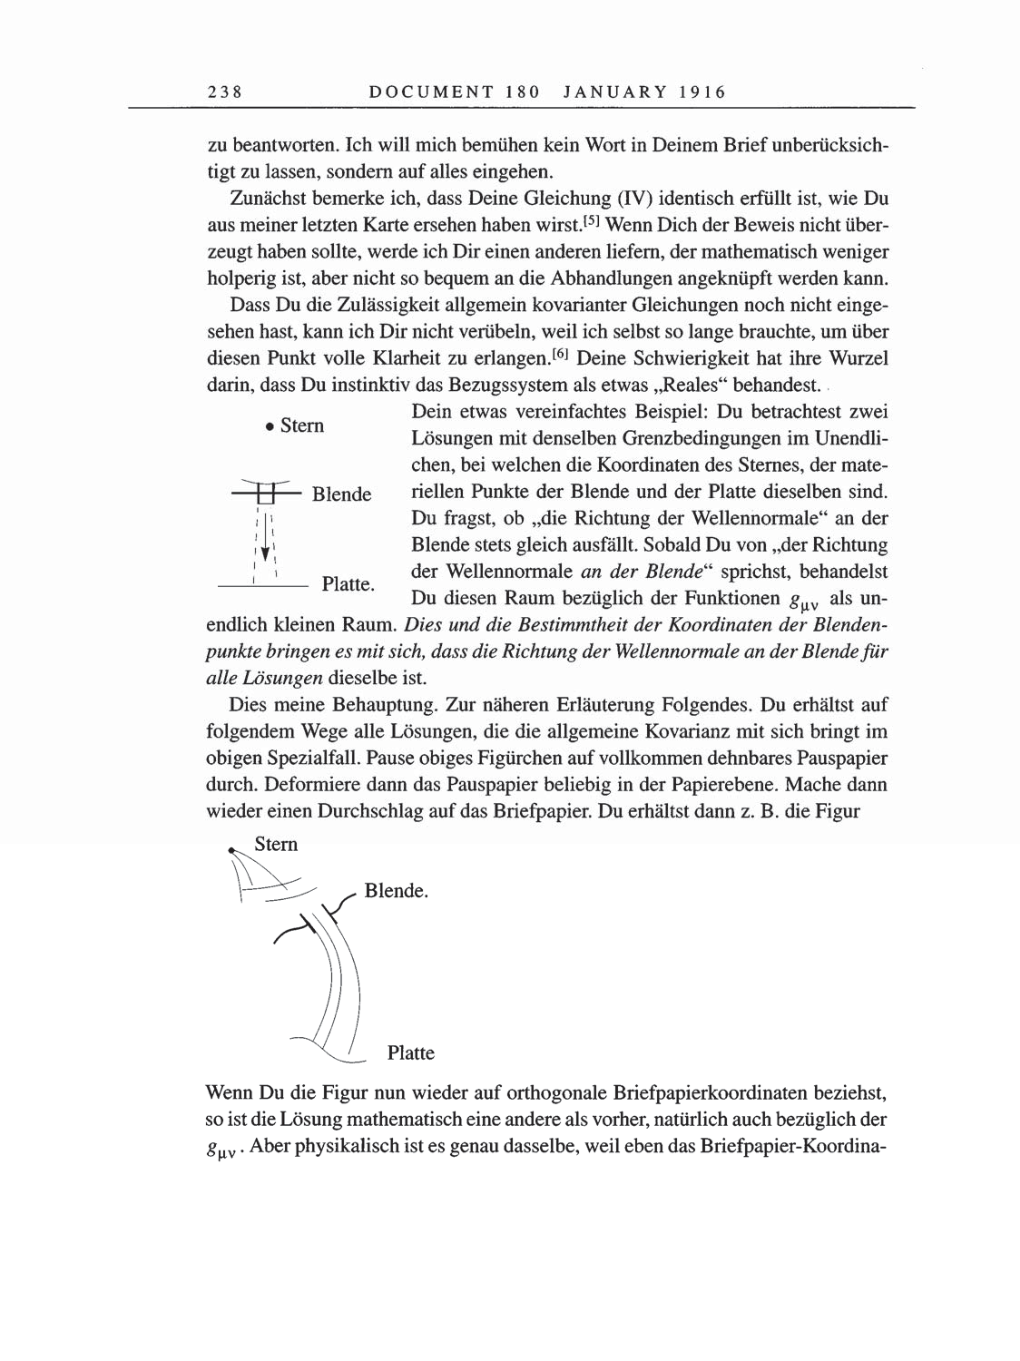 Volume 8, Part A: The Berlin Years: Correspondence 1914-1917 page 238